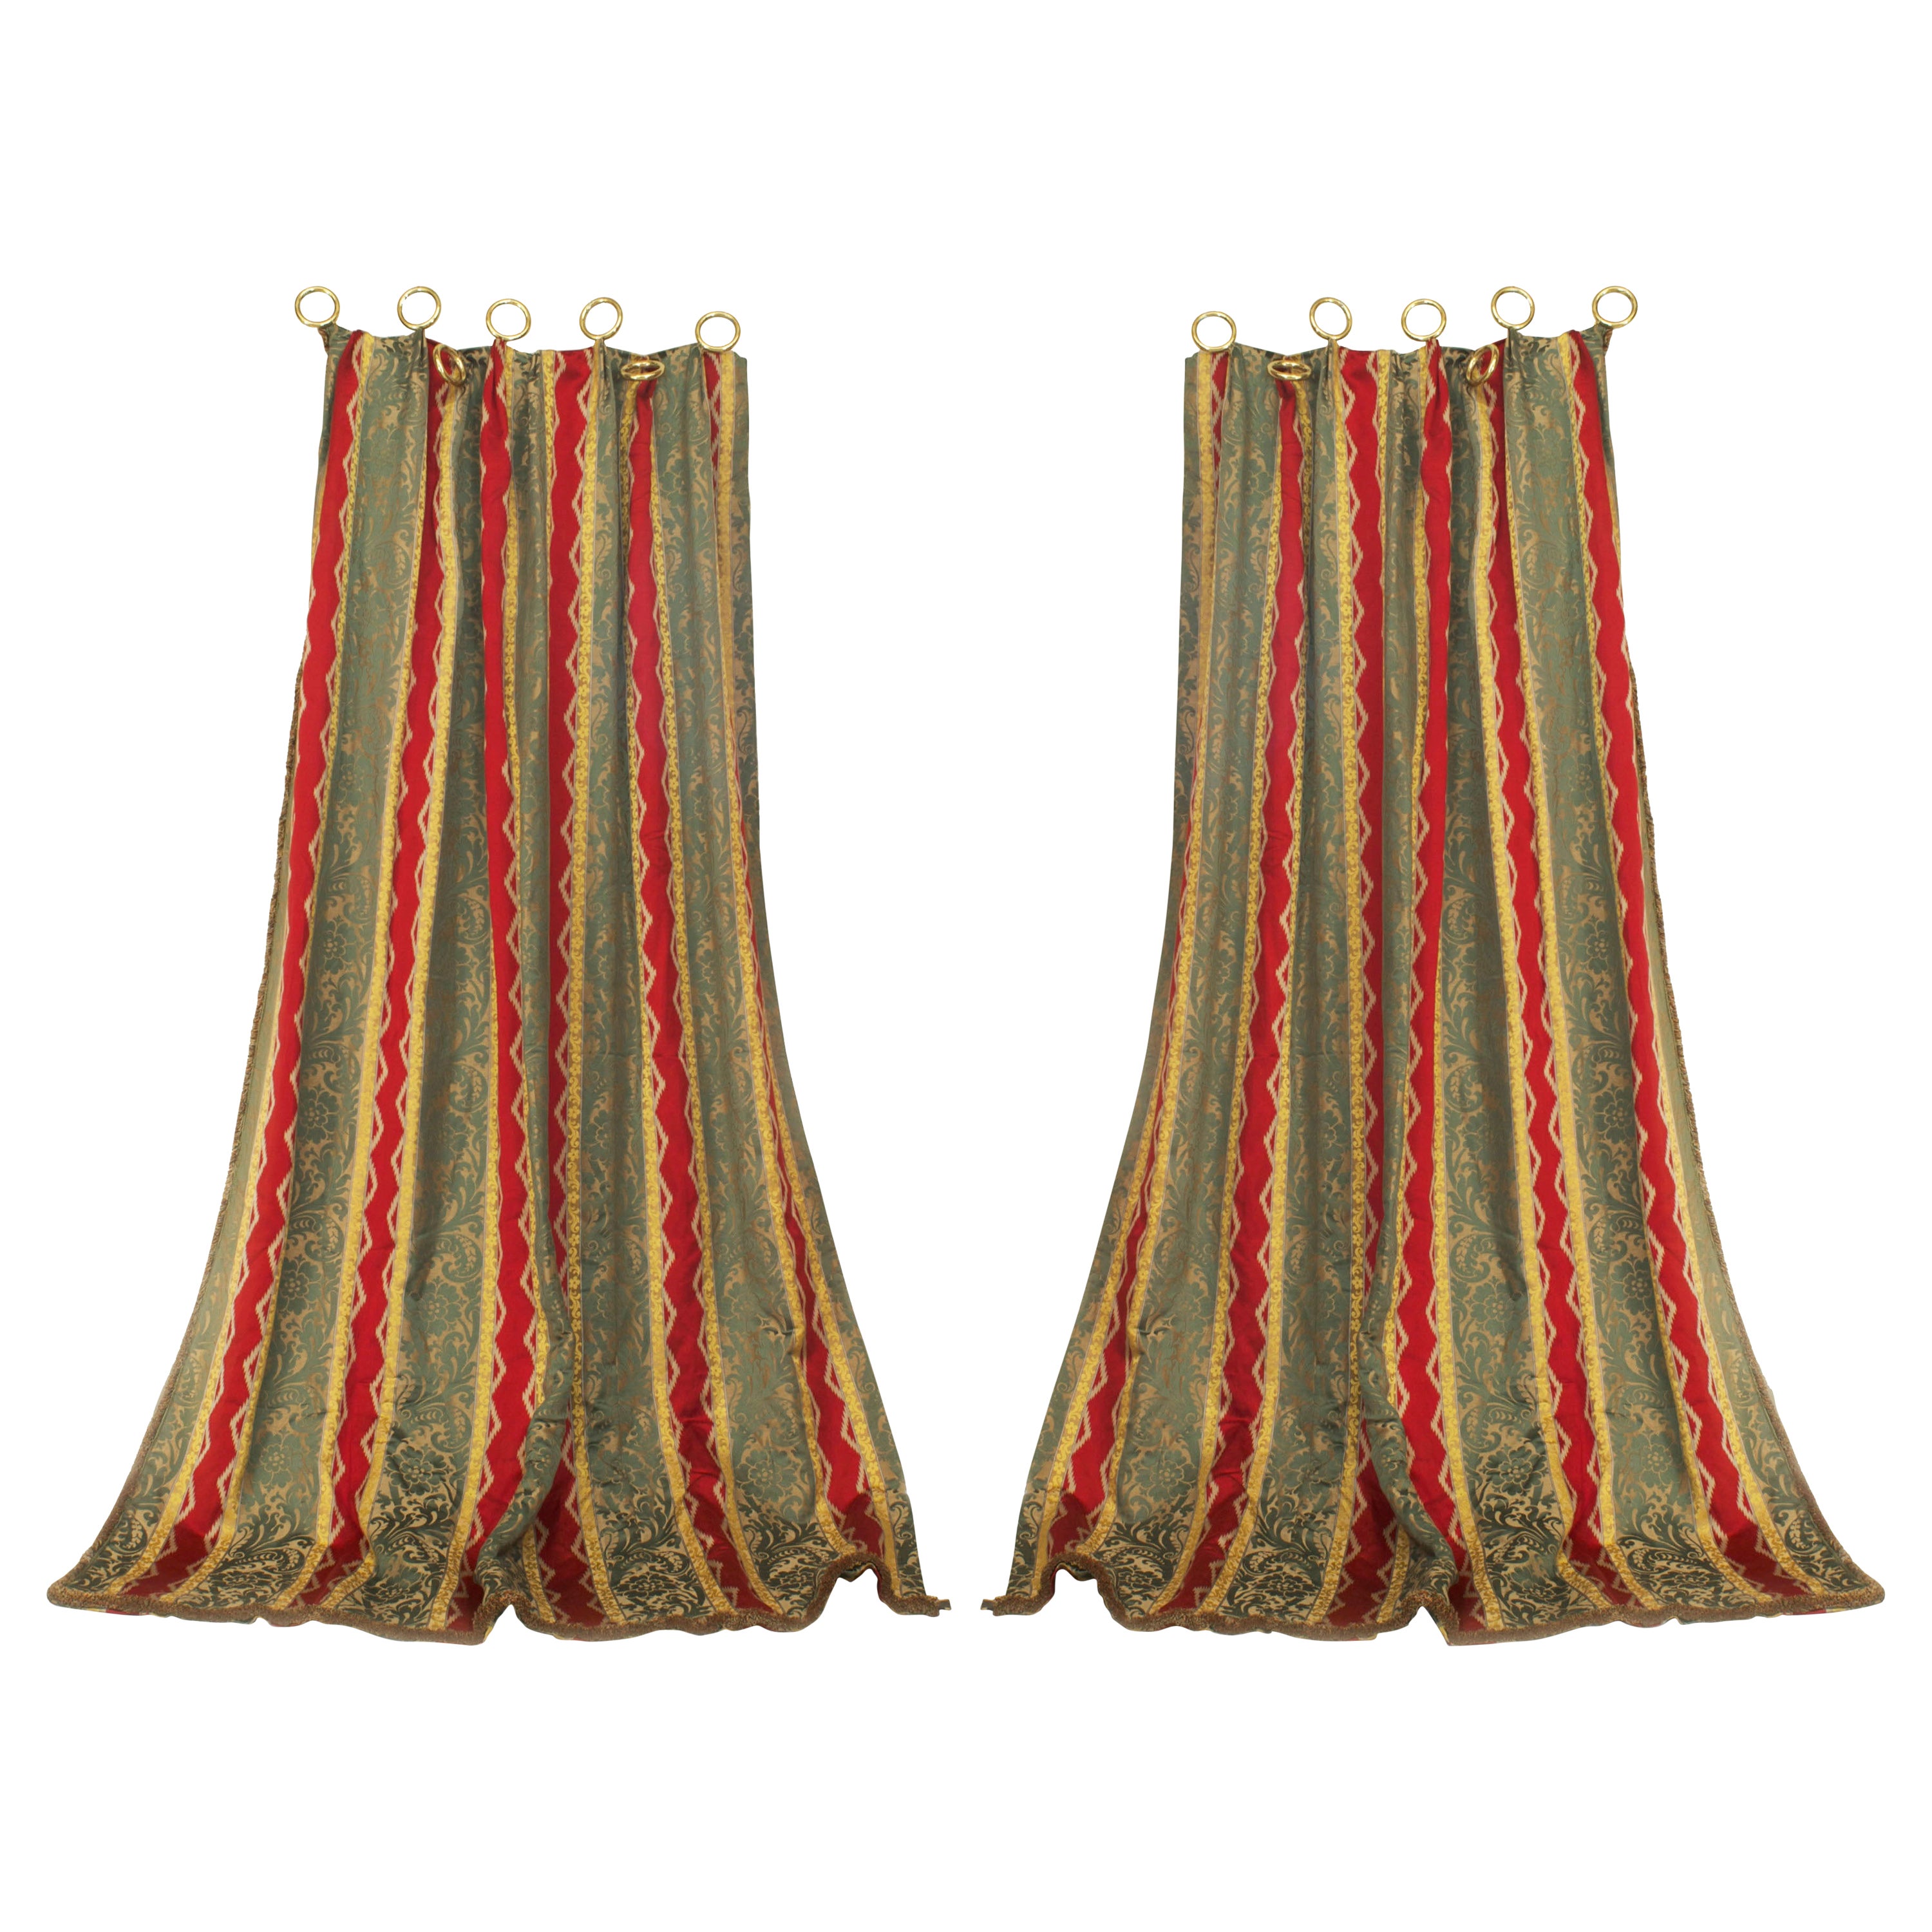 Pairs of French Victorian Damask Striped Drapes